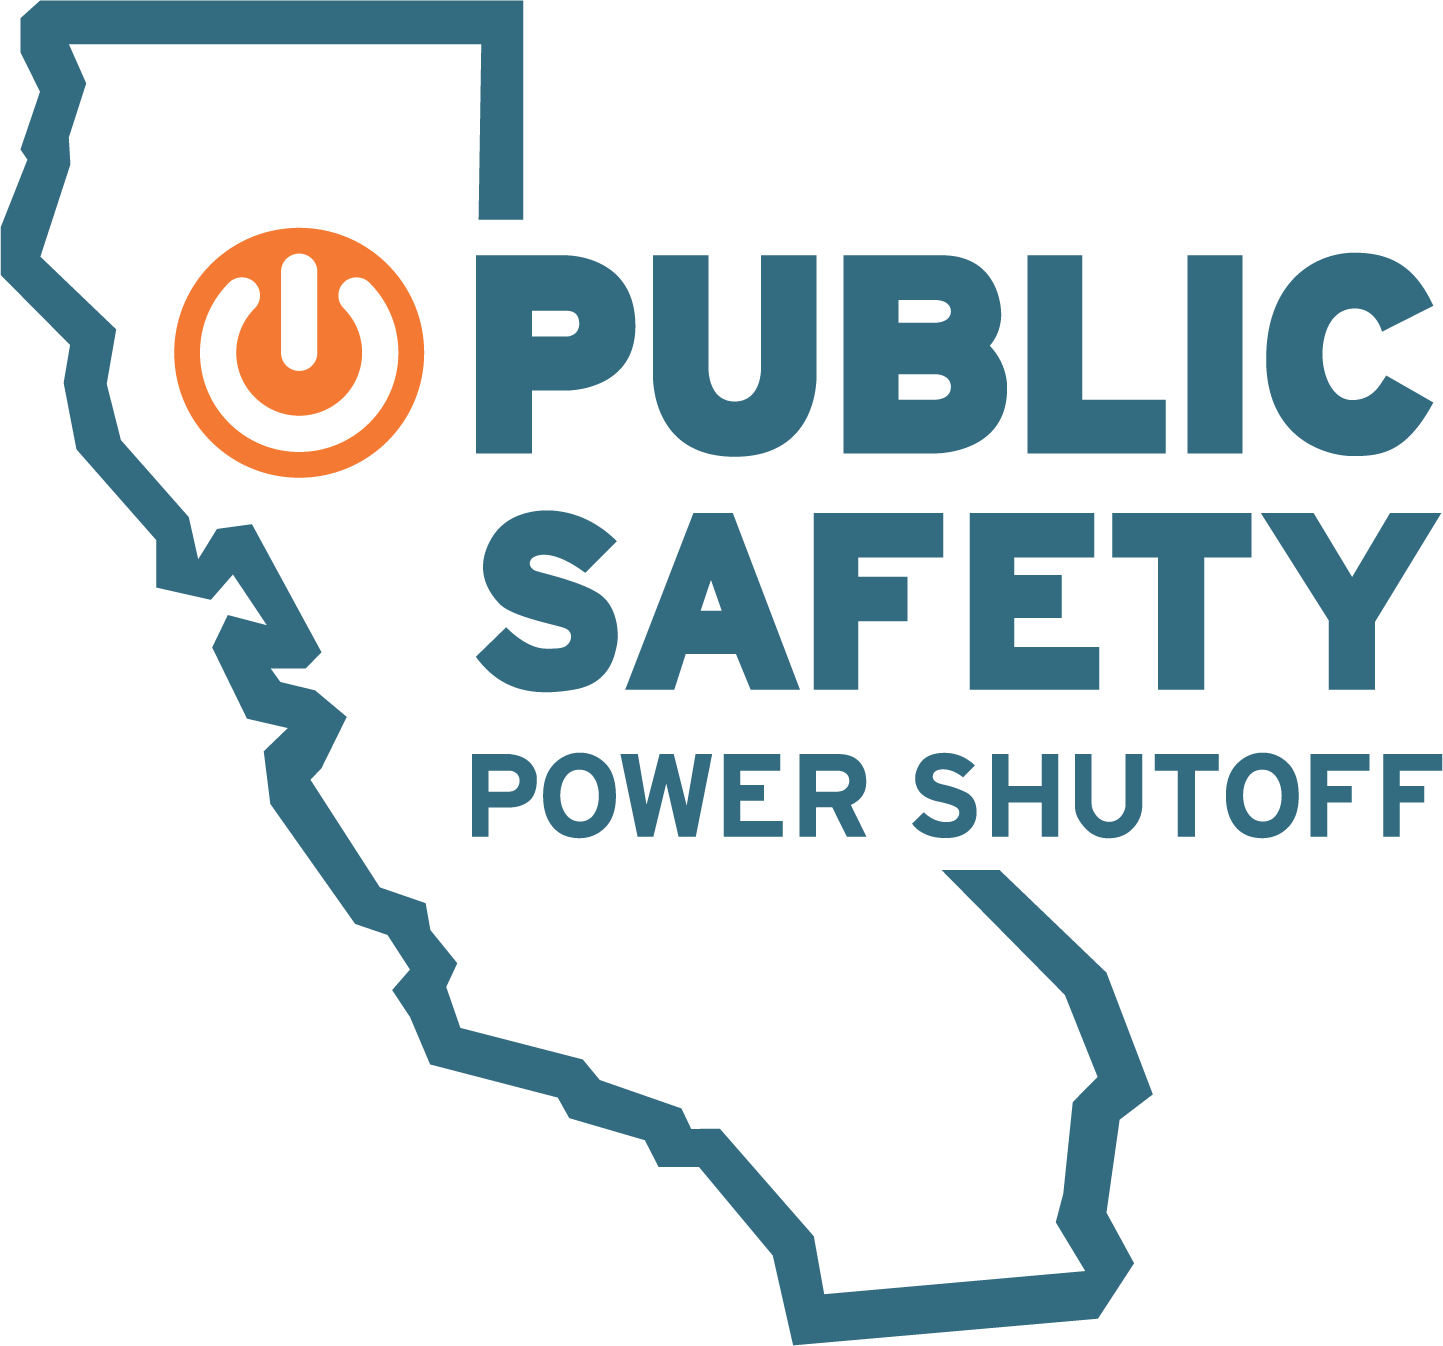 Image of the state of California with the words "Public Safety Power Shutoff"